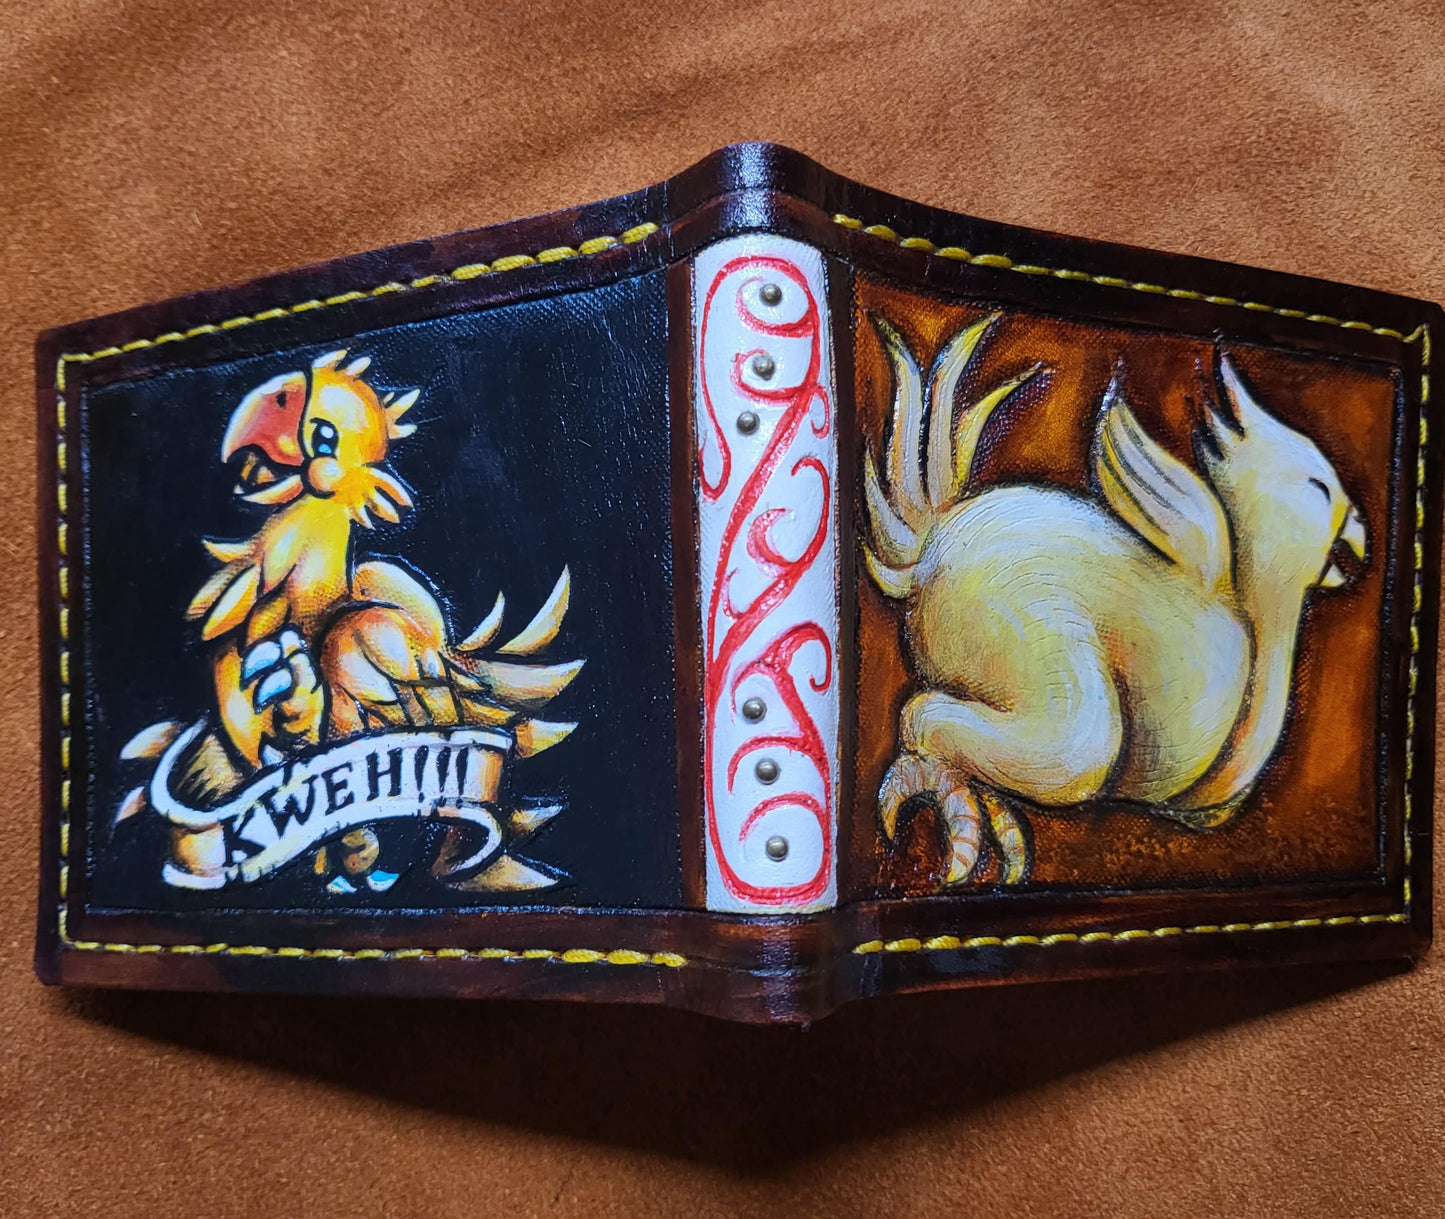 Kweh chocobo's - Leather Bifold Wallet - Handcrafted Final Fantasy inspired Wallet -